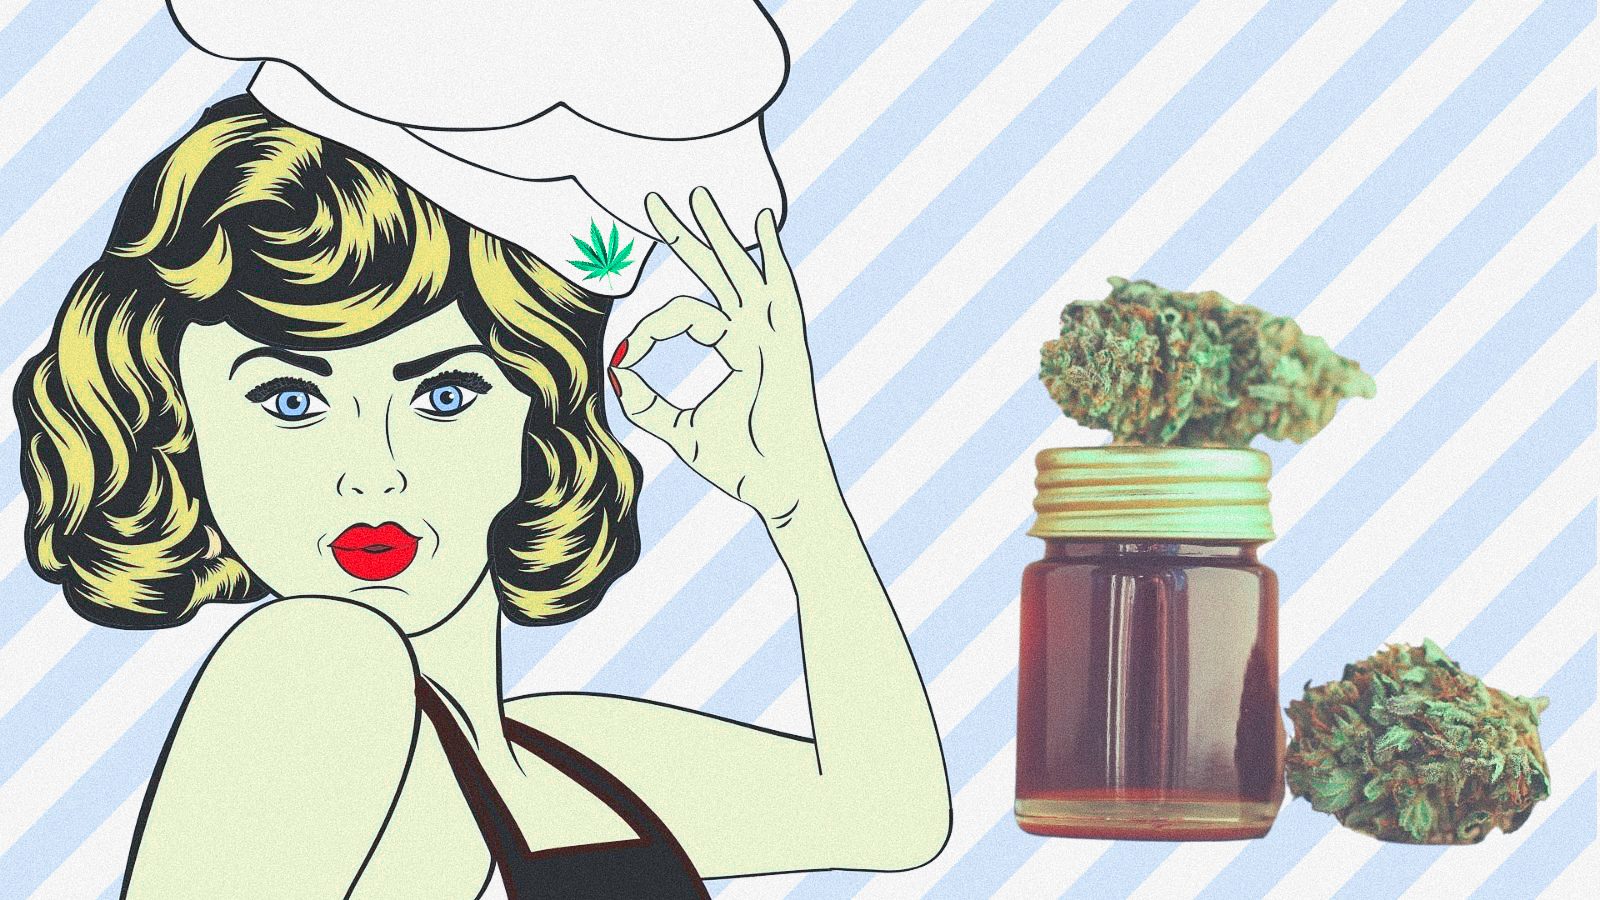 A collage of a retro woman chef and a jar of cannabis cooking oil next to her.